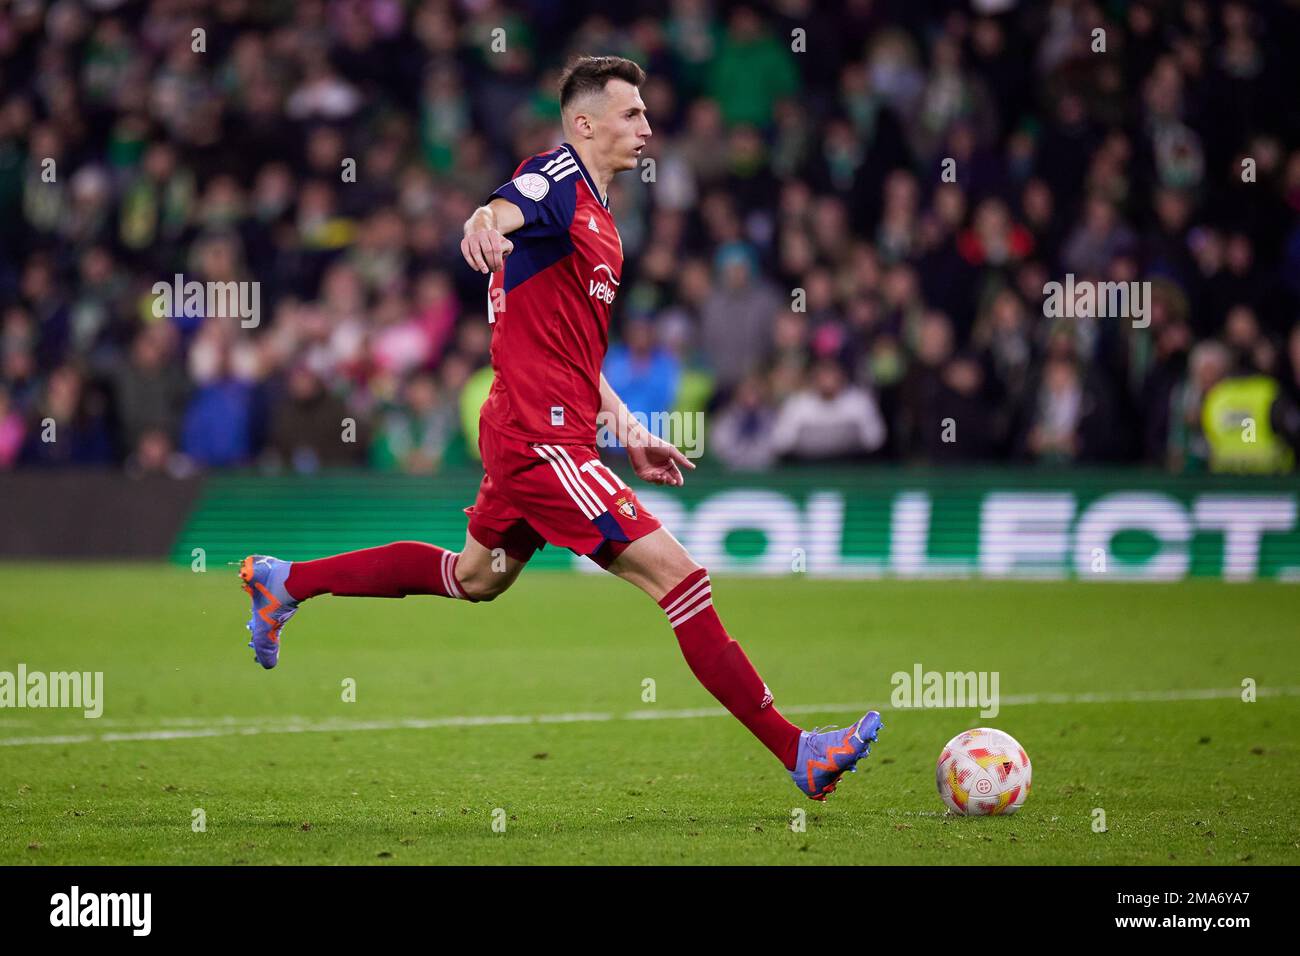 Seville, Spain. 18th Jan, 2023. Ante Budimir (17) of Osasuna scores from  the penaly spot during the Copa del Rey match between Real Betis and Osasuna  at the Estadio Benito Villamarin in